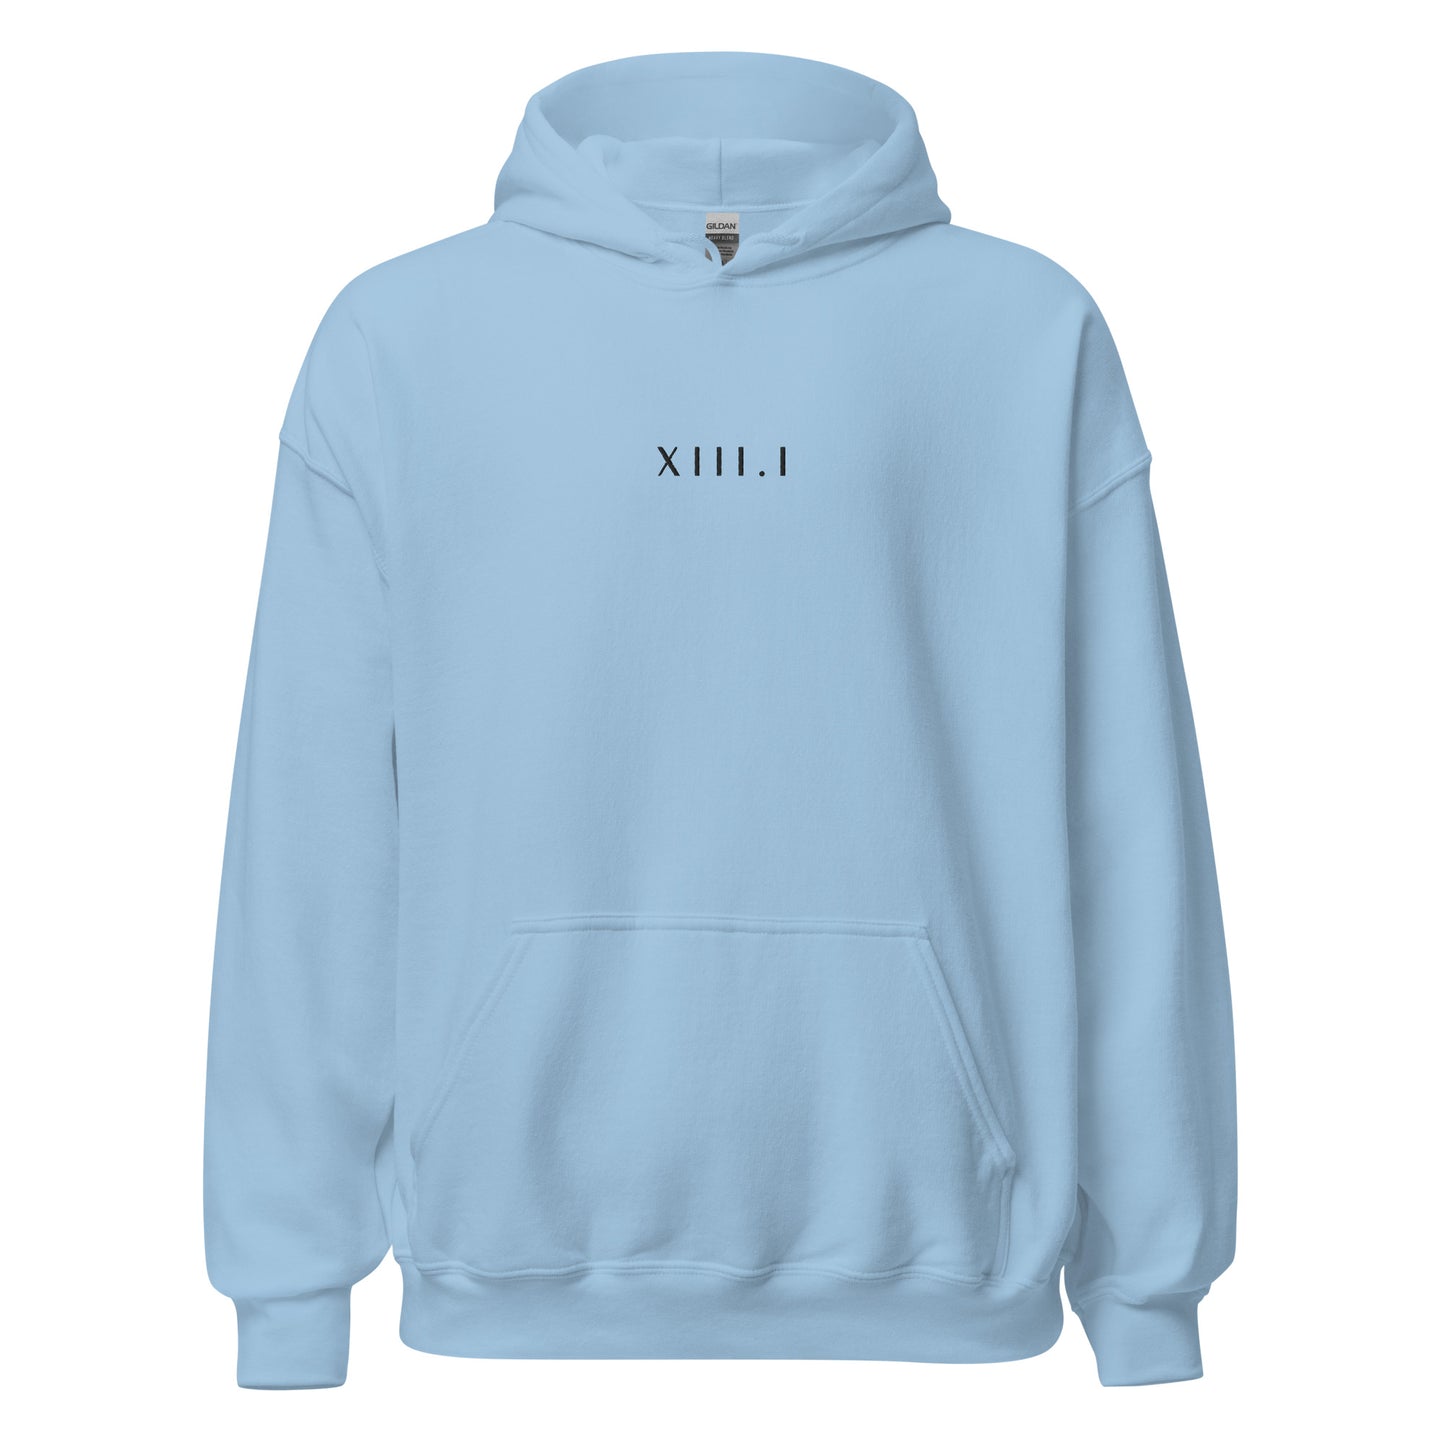 light blue unisex hoodie with XIII.I 13.1 half marathon in roman numerals embroidered in black writing